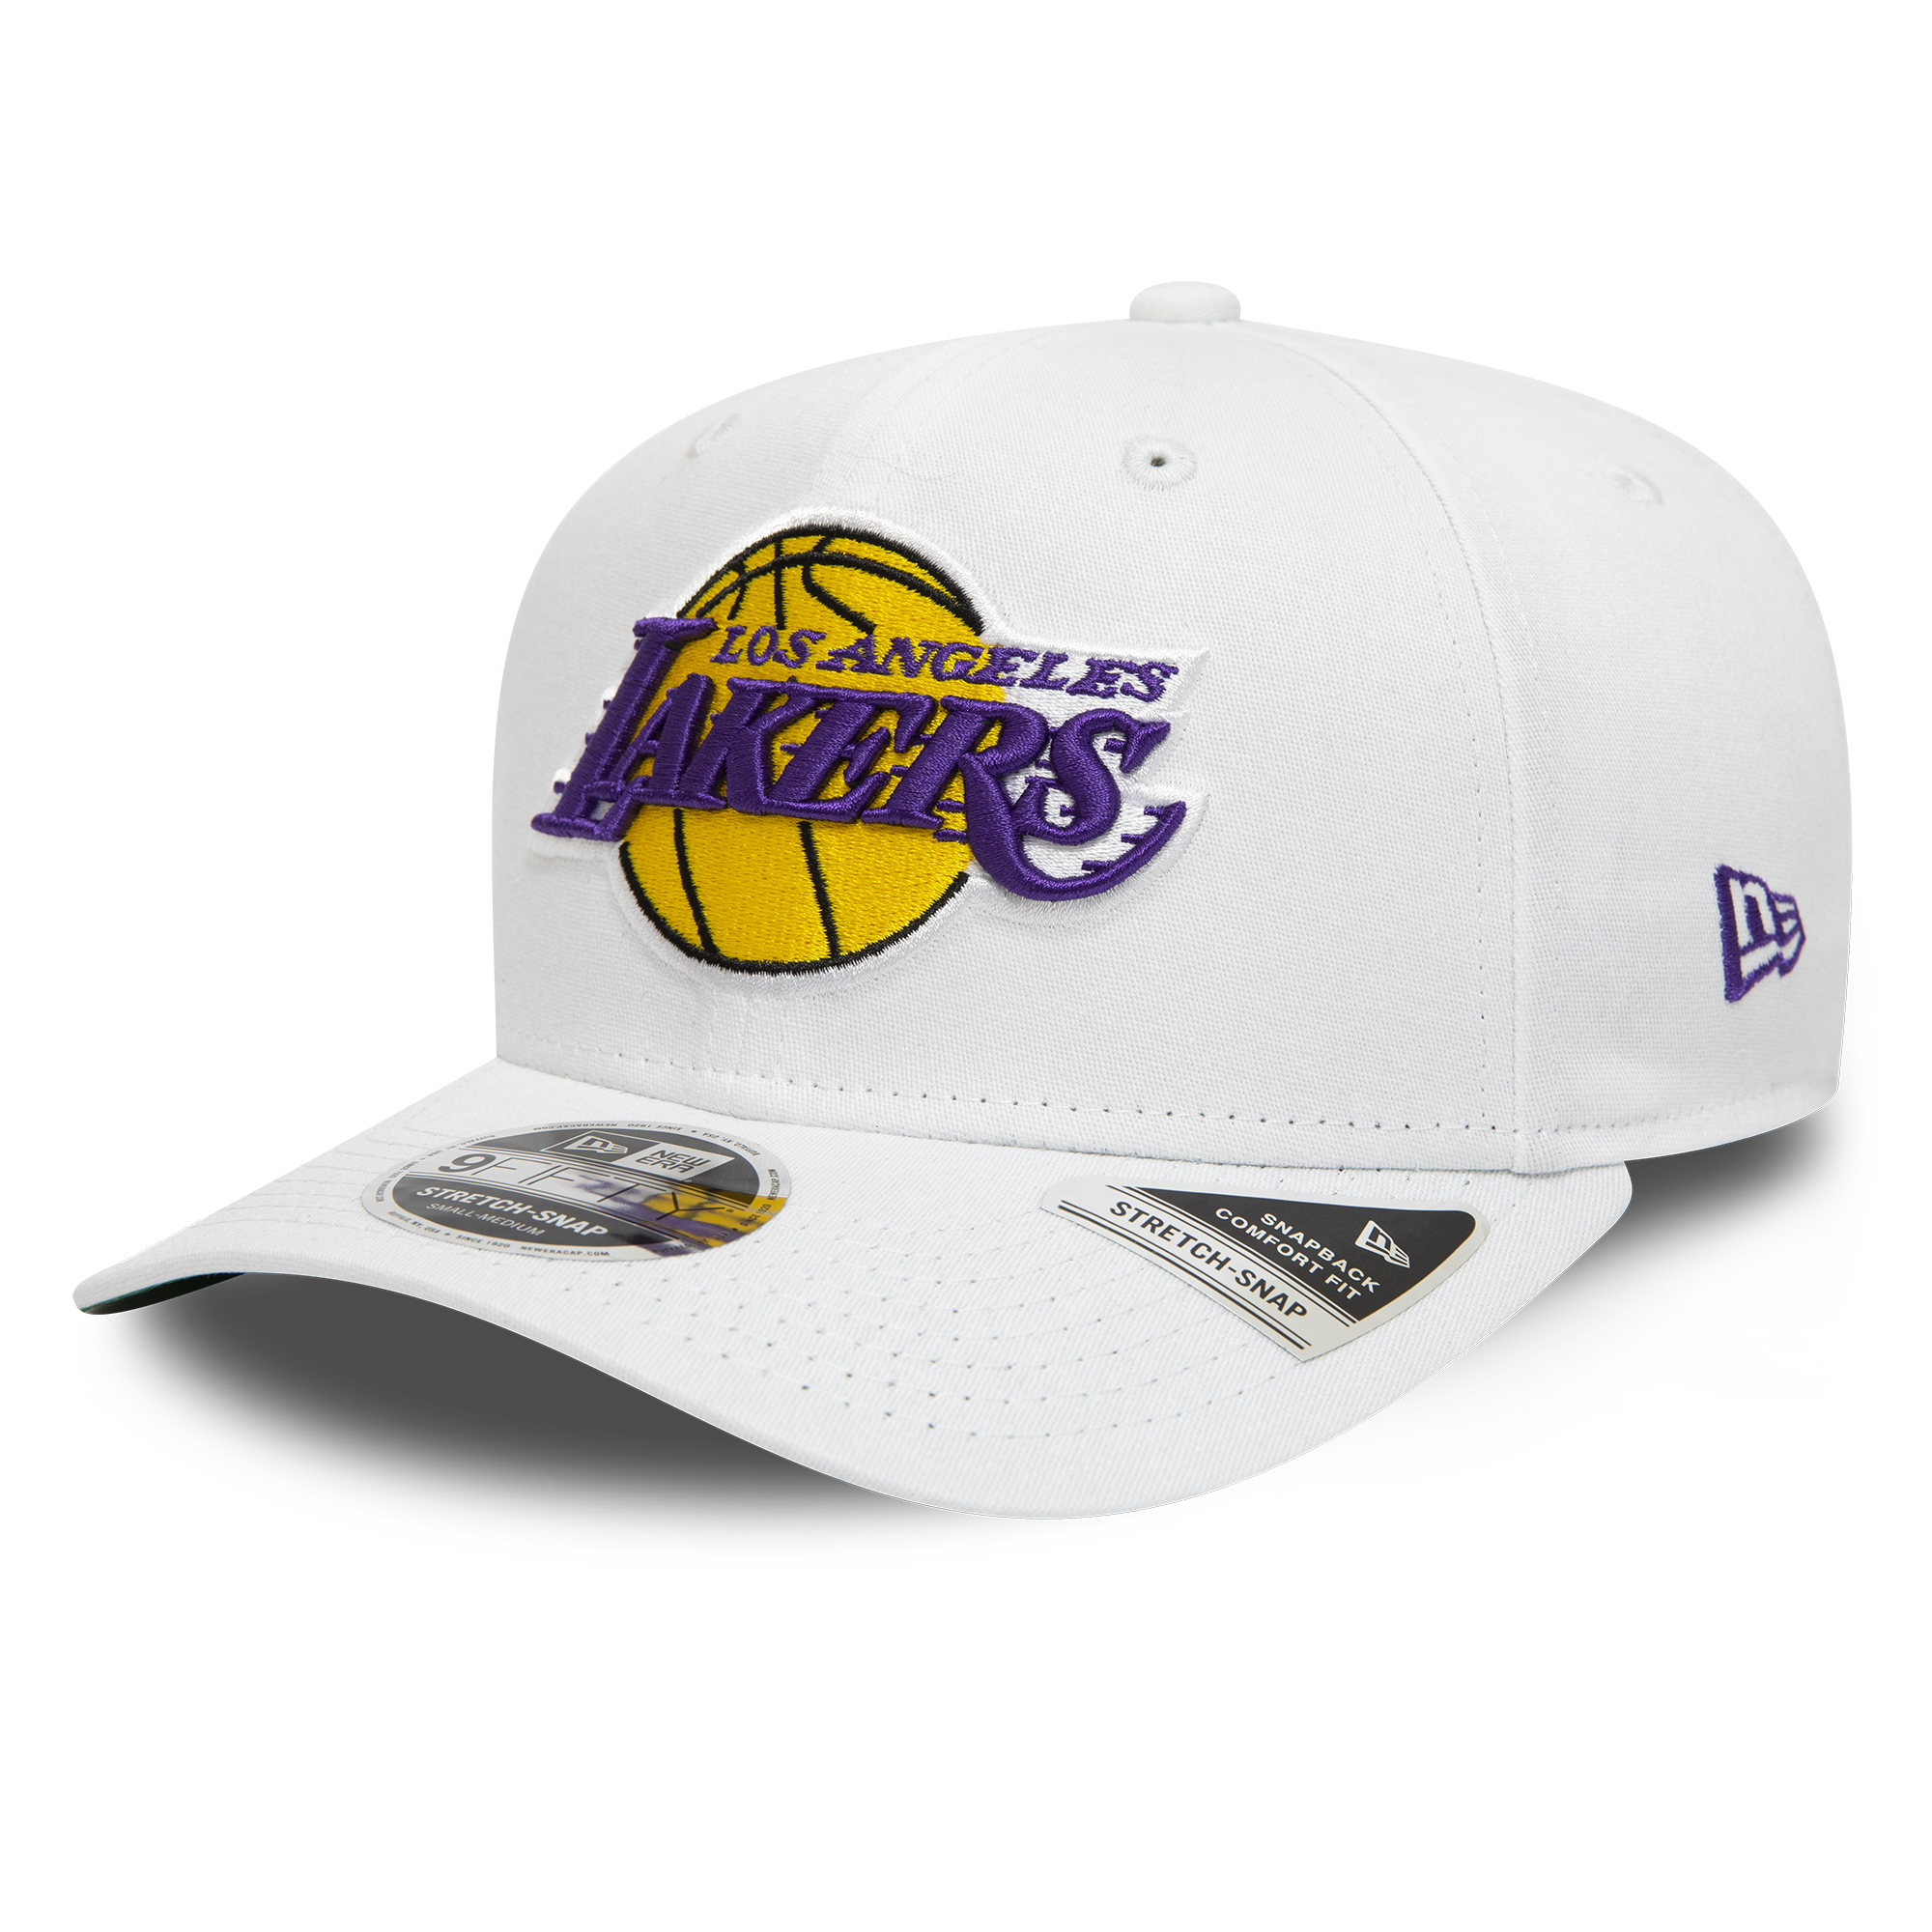 Official New Era LA Lakers NBA Team Colour White 9FIFTY Stretch Snap ...